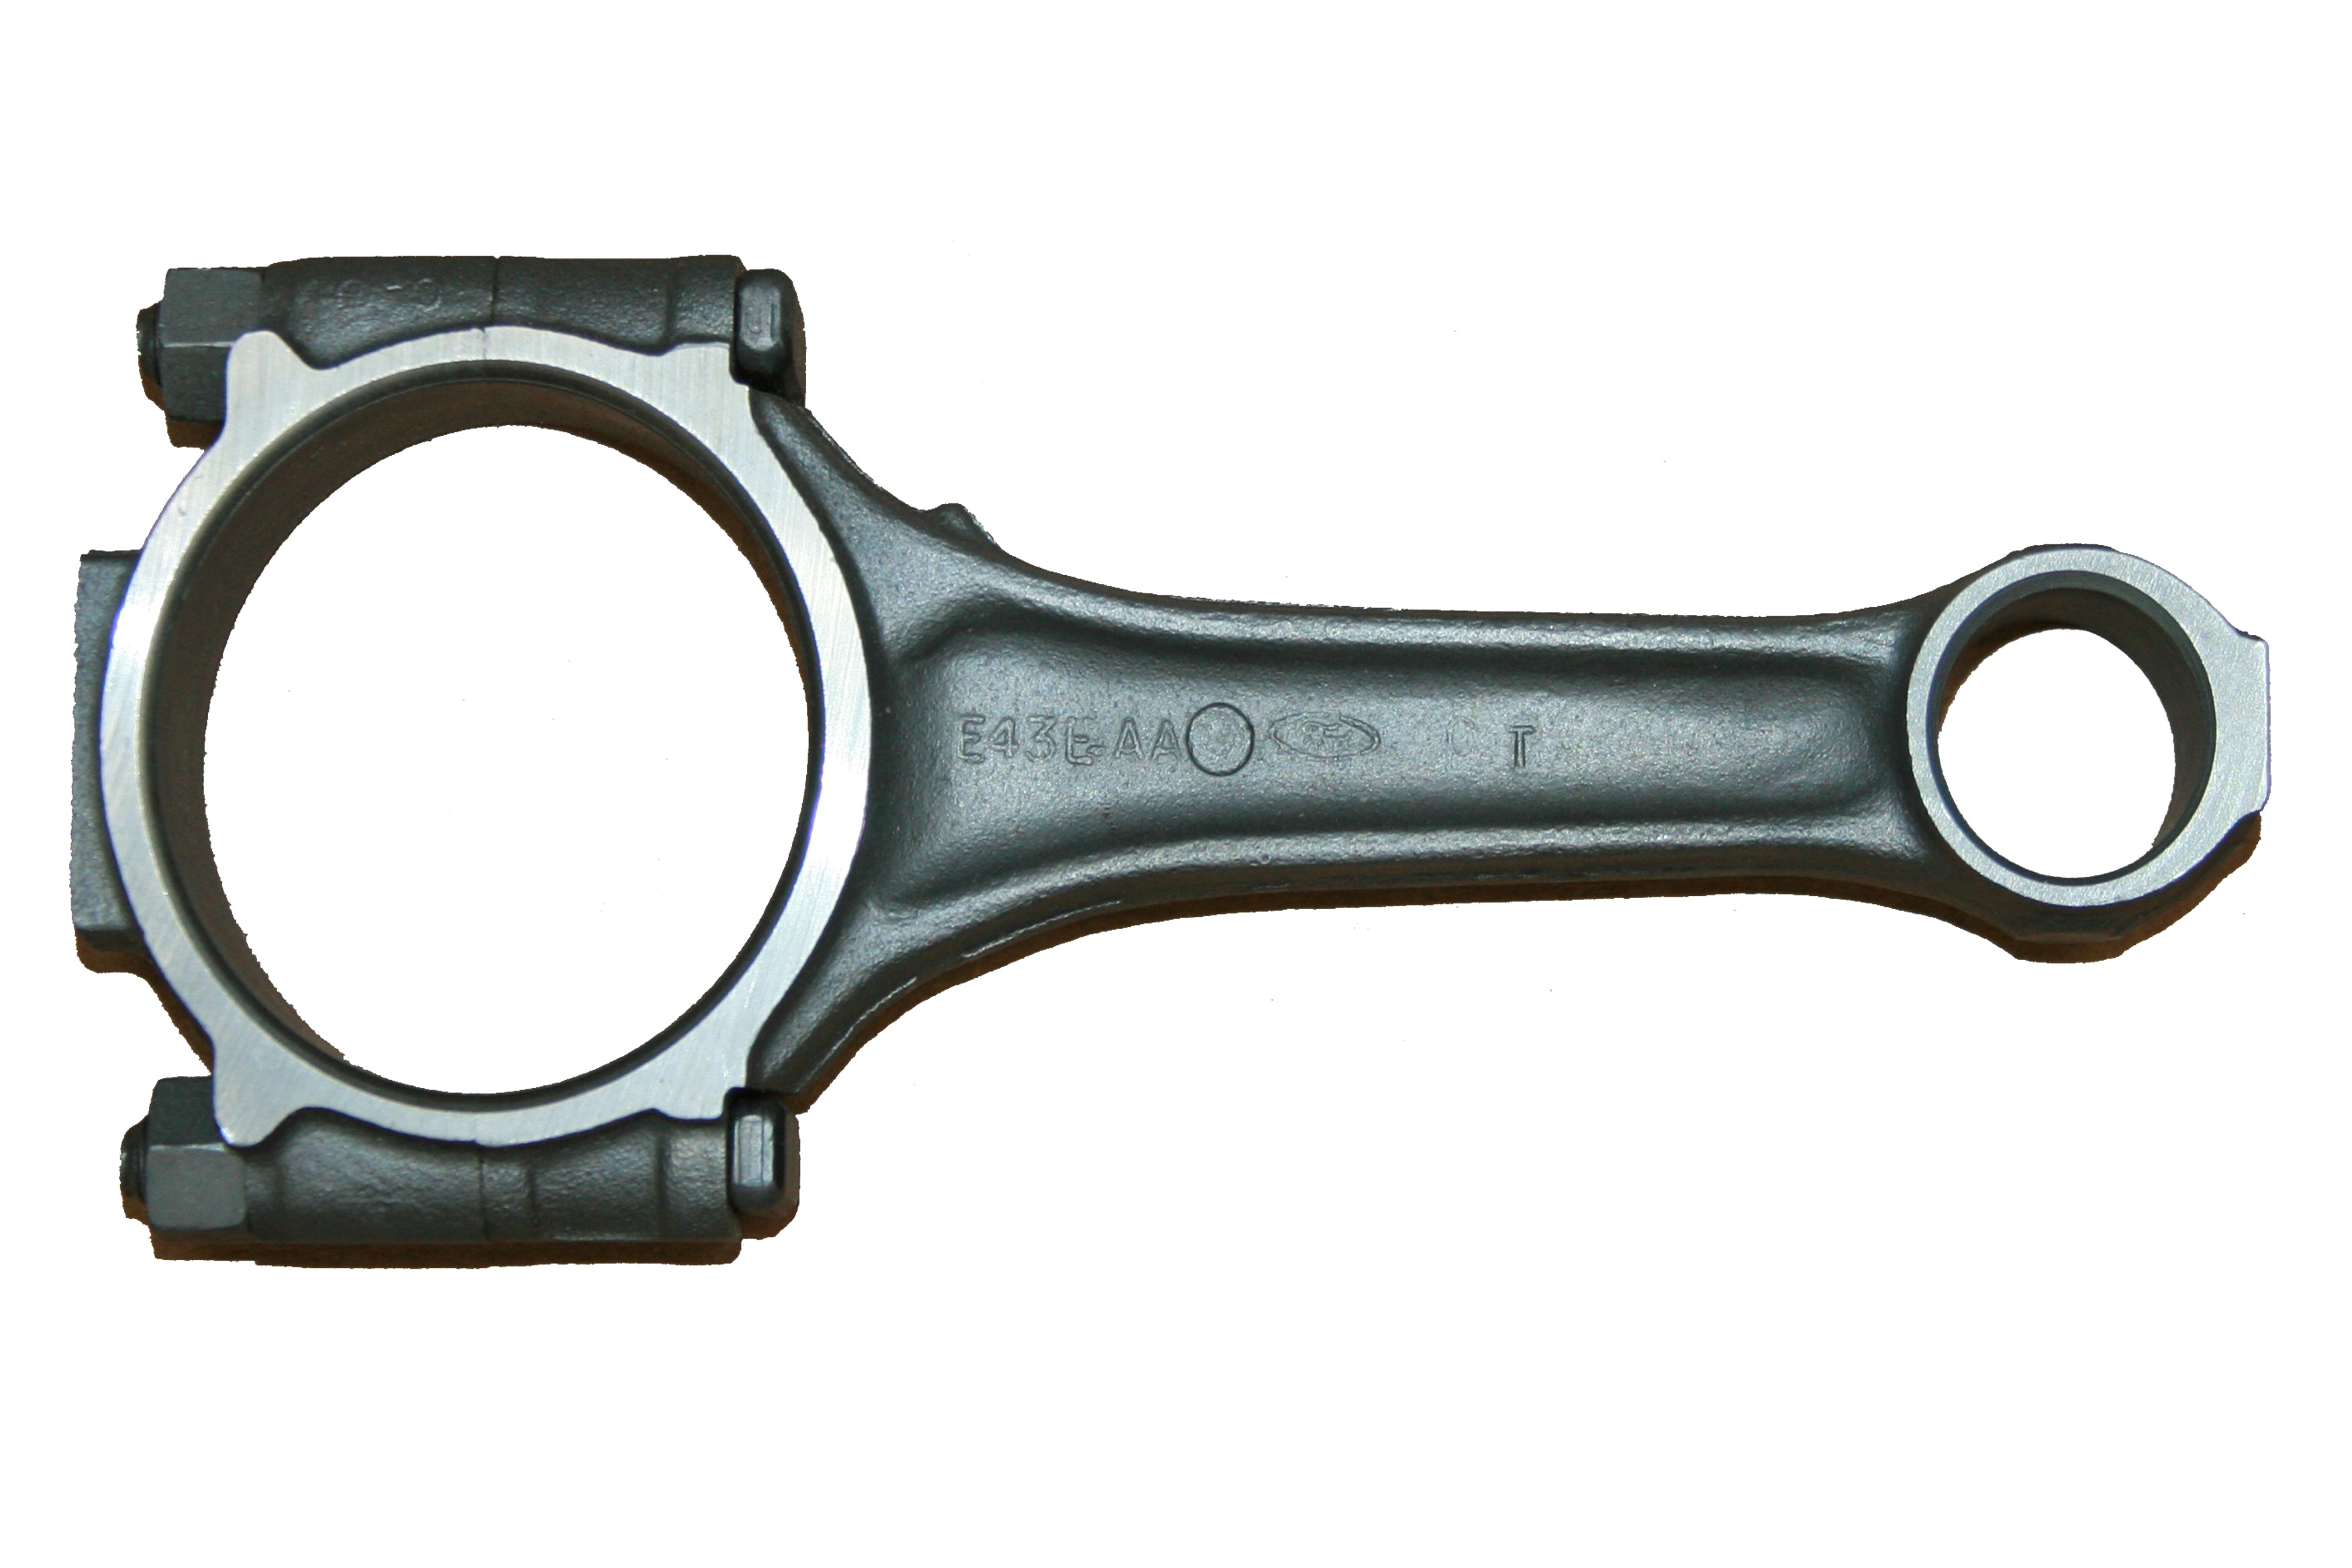 1983-1986 Ford Mustang 2.3L 140Cu Connecting Rod Cast # E43E-AA